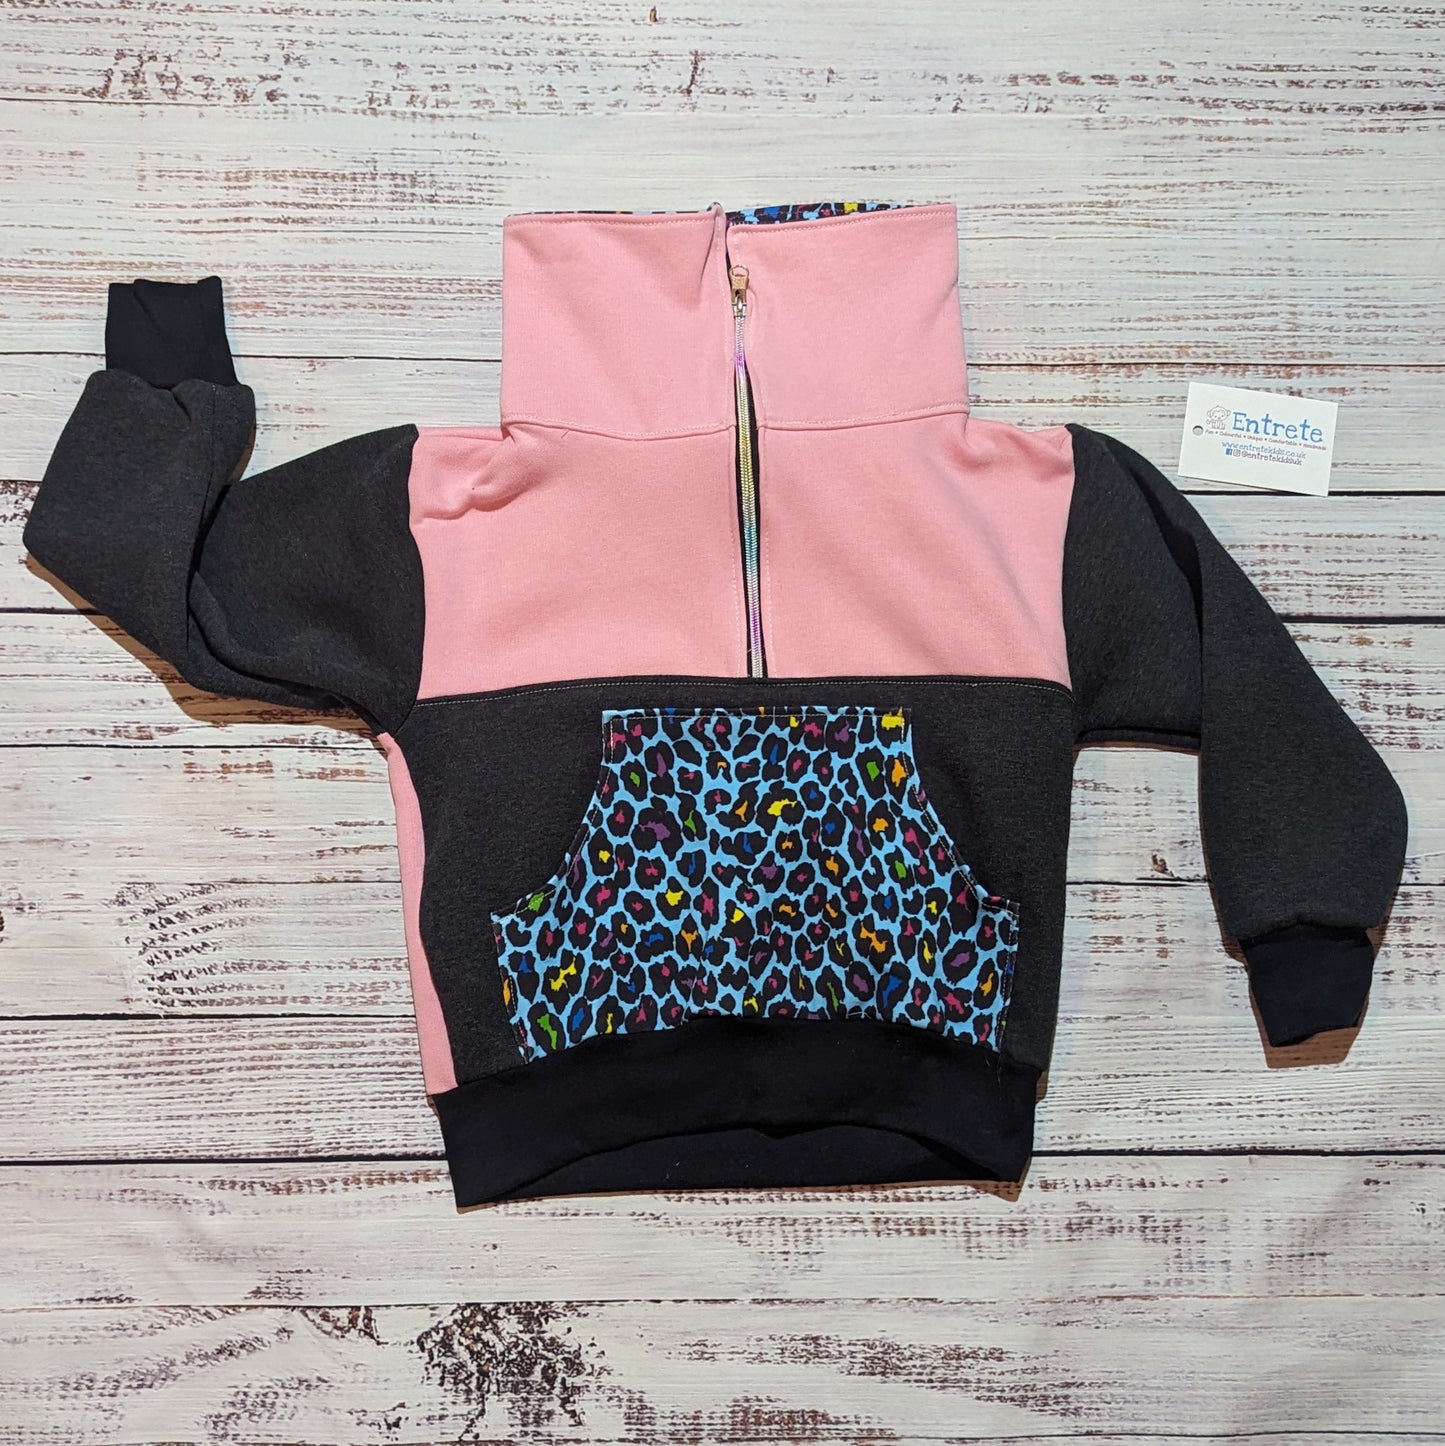 The vibrant neon leopard print zip sweatshirt. Handmade using soft and comfortable Cotton French terry and cotton ribbing. Shown with the collar closed for warmth.